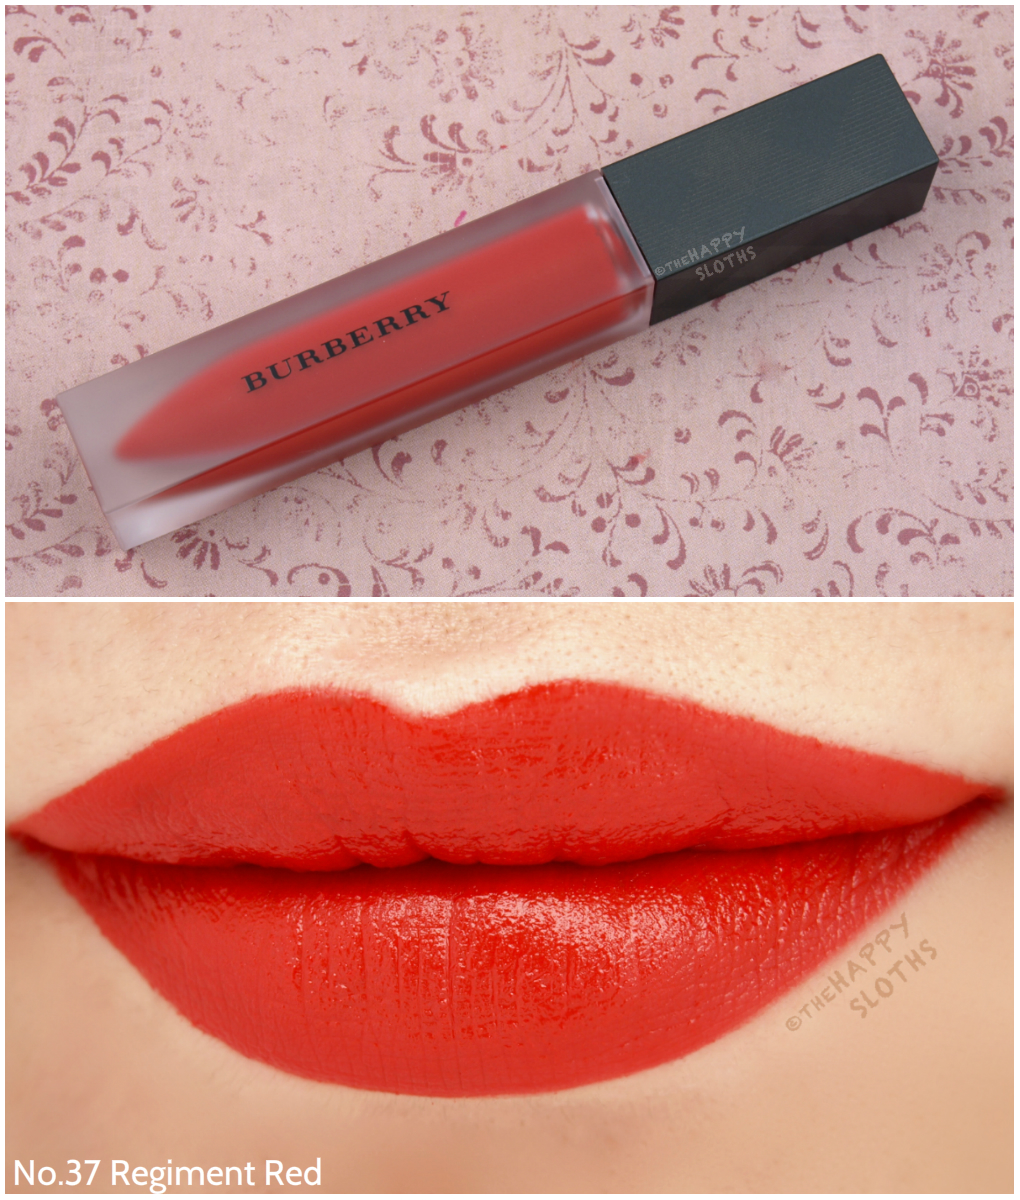 Burberry Liquid Lip Velvet Review and Swatches: No.37 Regiment Red